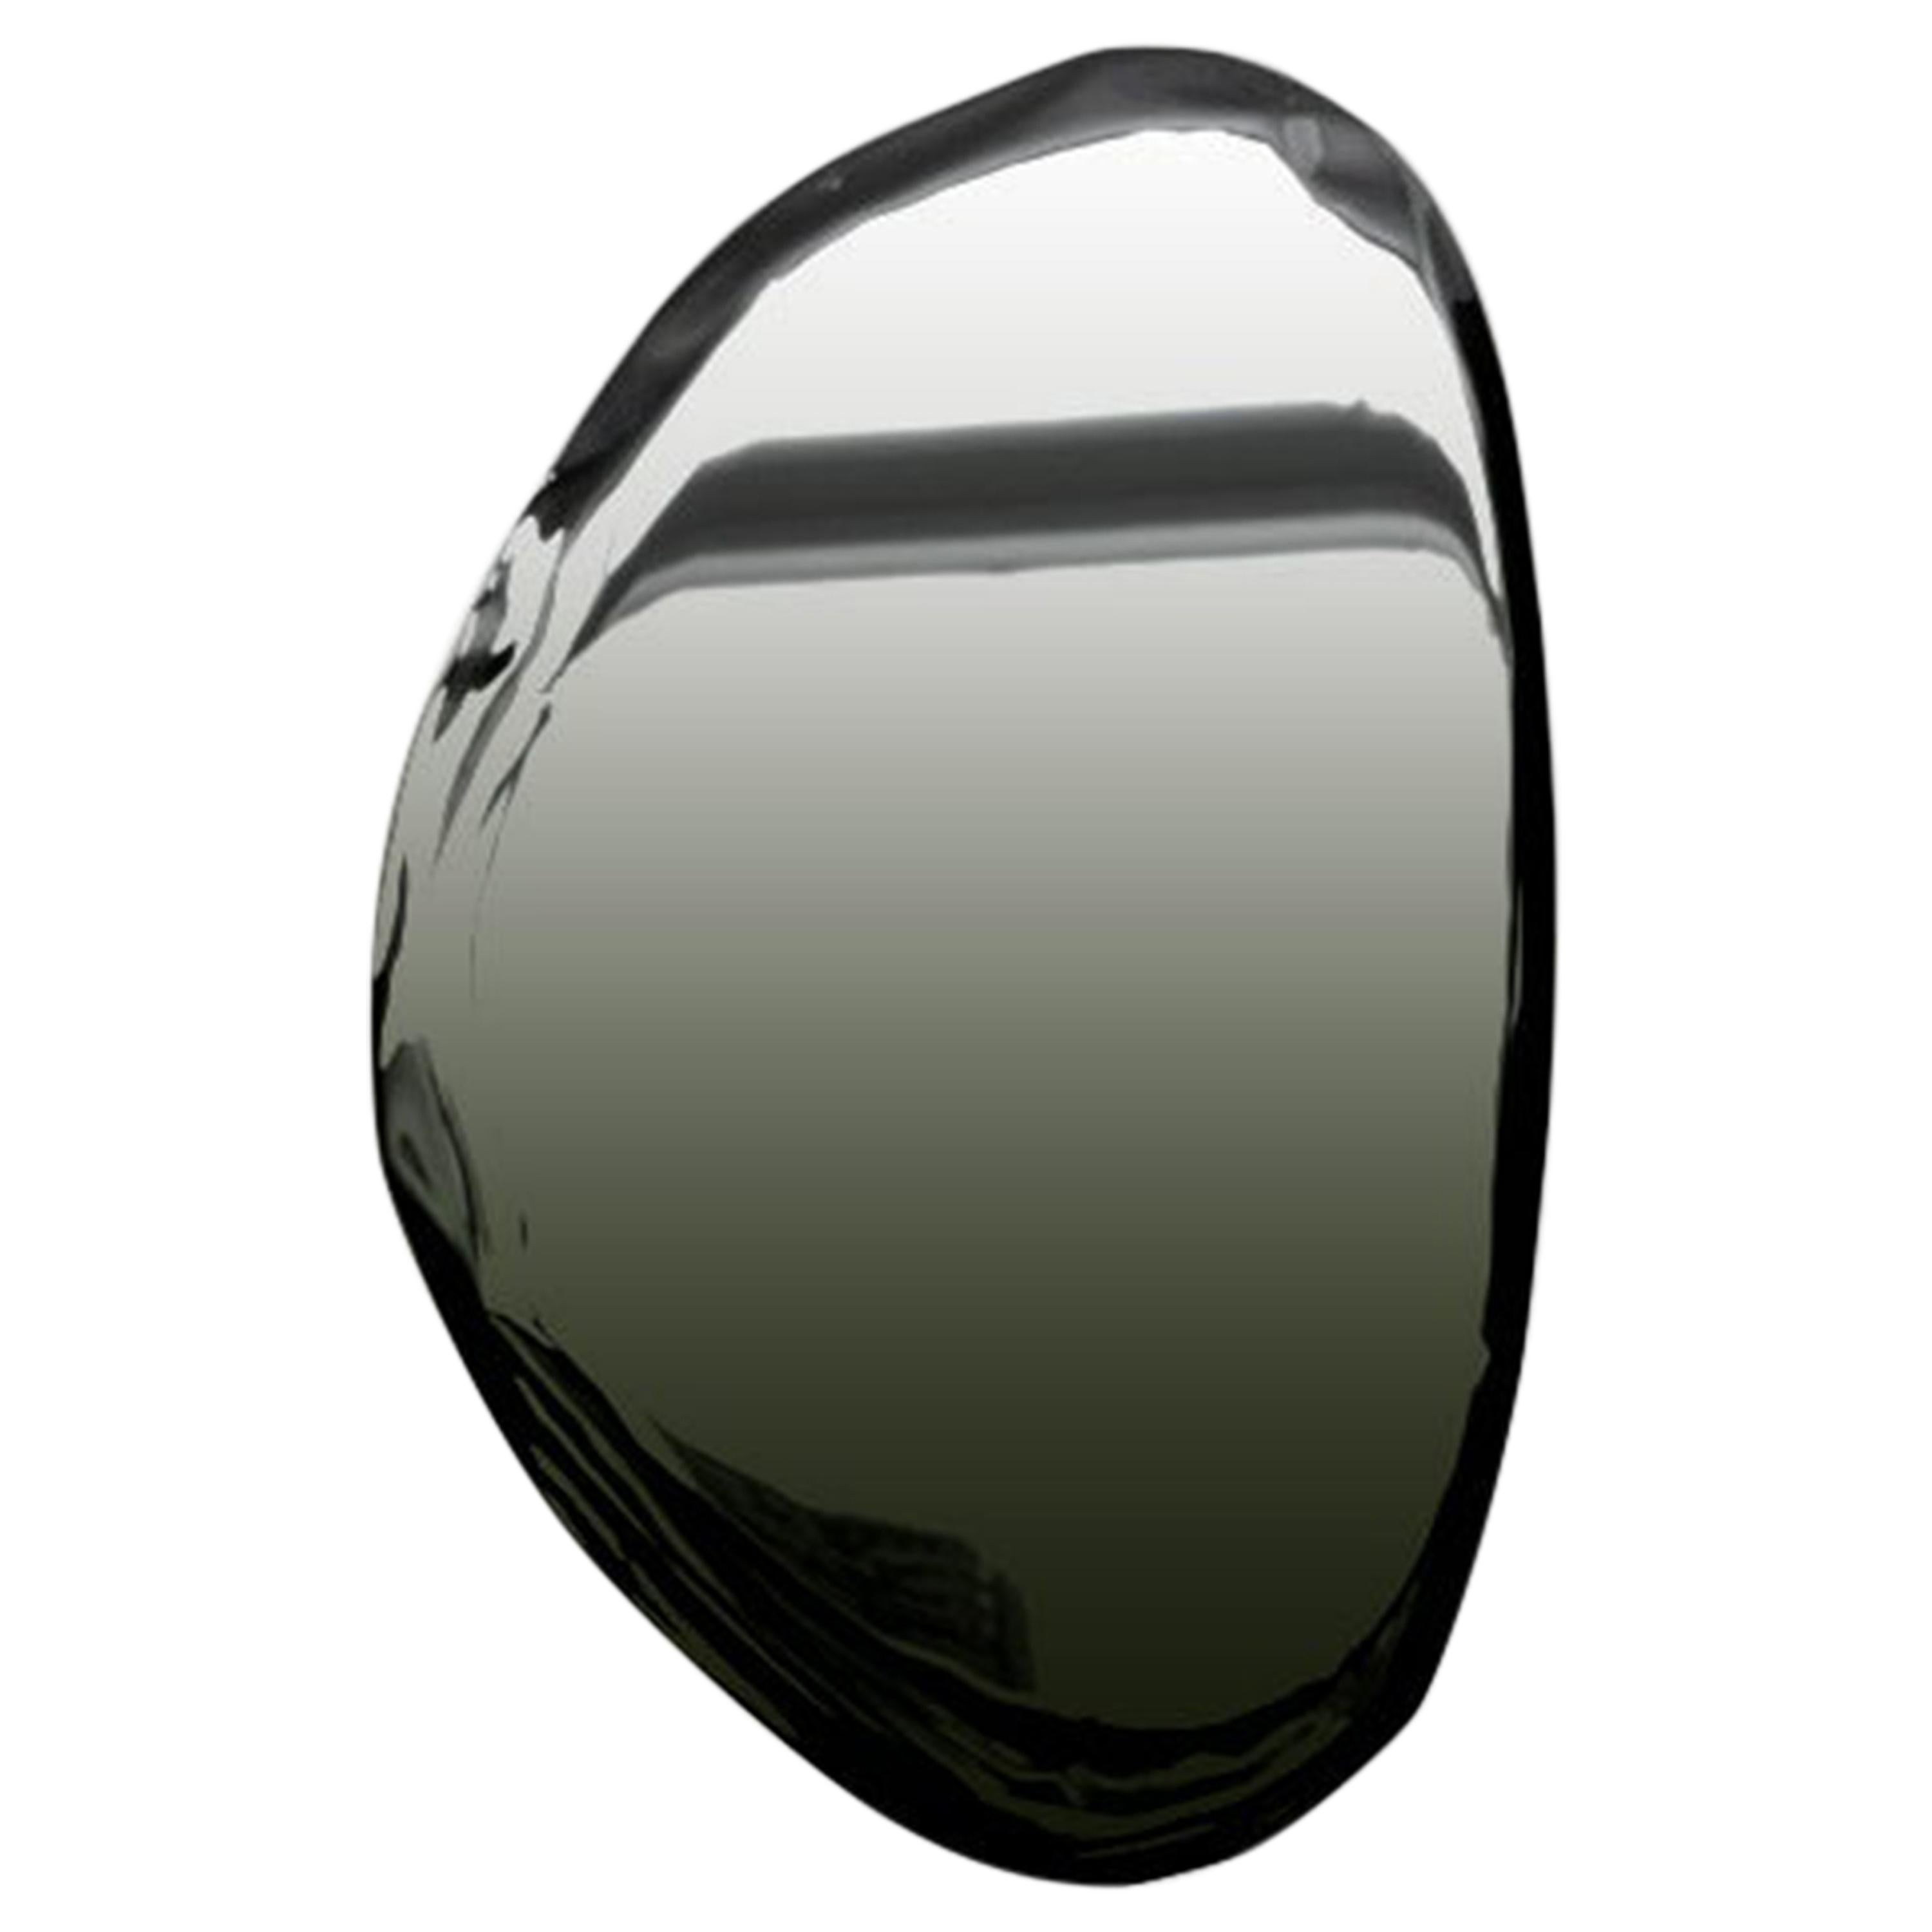 Tafla O2 Polished Dark Matter Color Stainless Steel Wall Mirror by Zieta For Sale